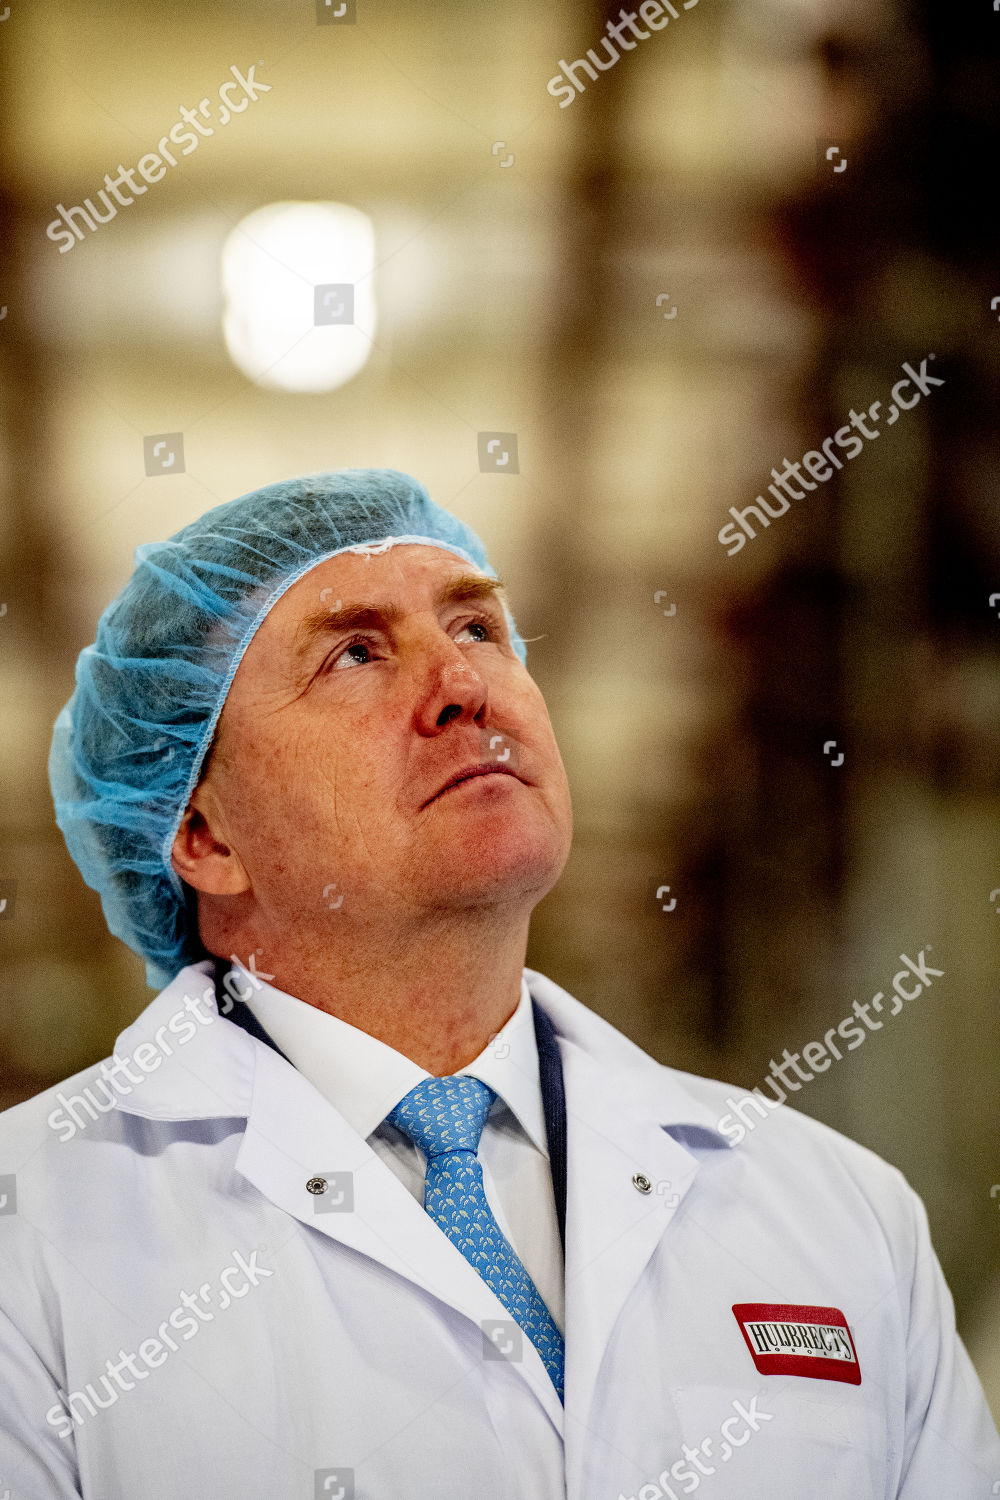 king-willem-alexander-is-making-a-working-visit-to-two-companies-in-brainport-eindhoven-helmond-the-netherlands-shutterstock-editorial-10031459s.jpg